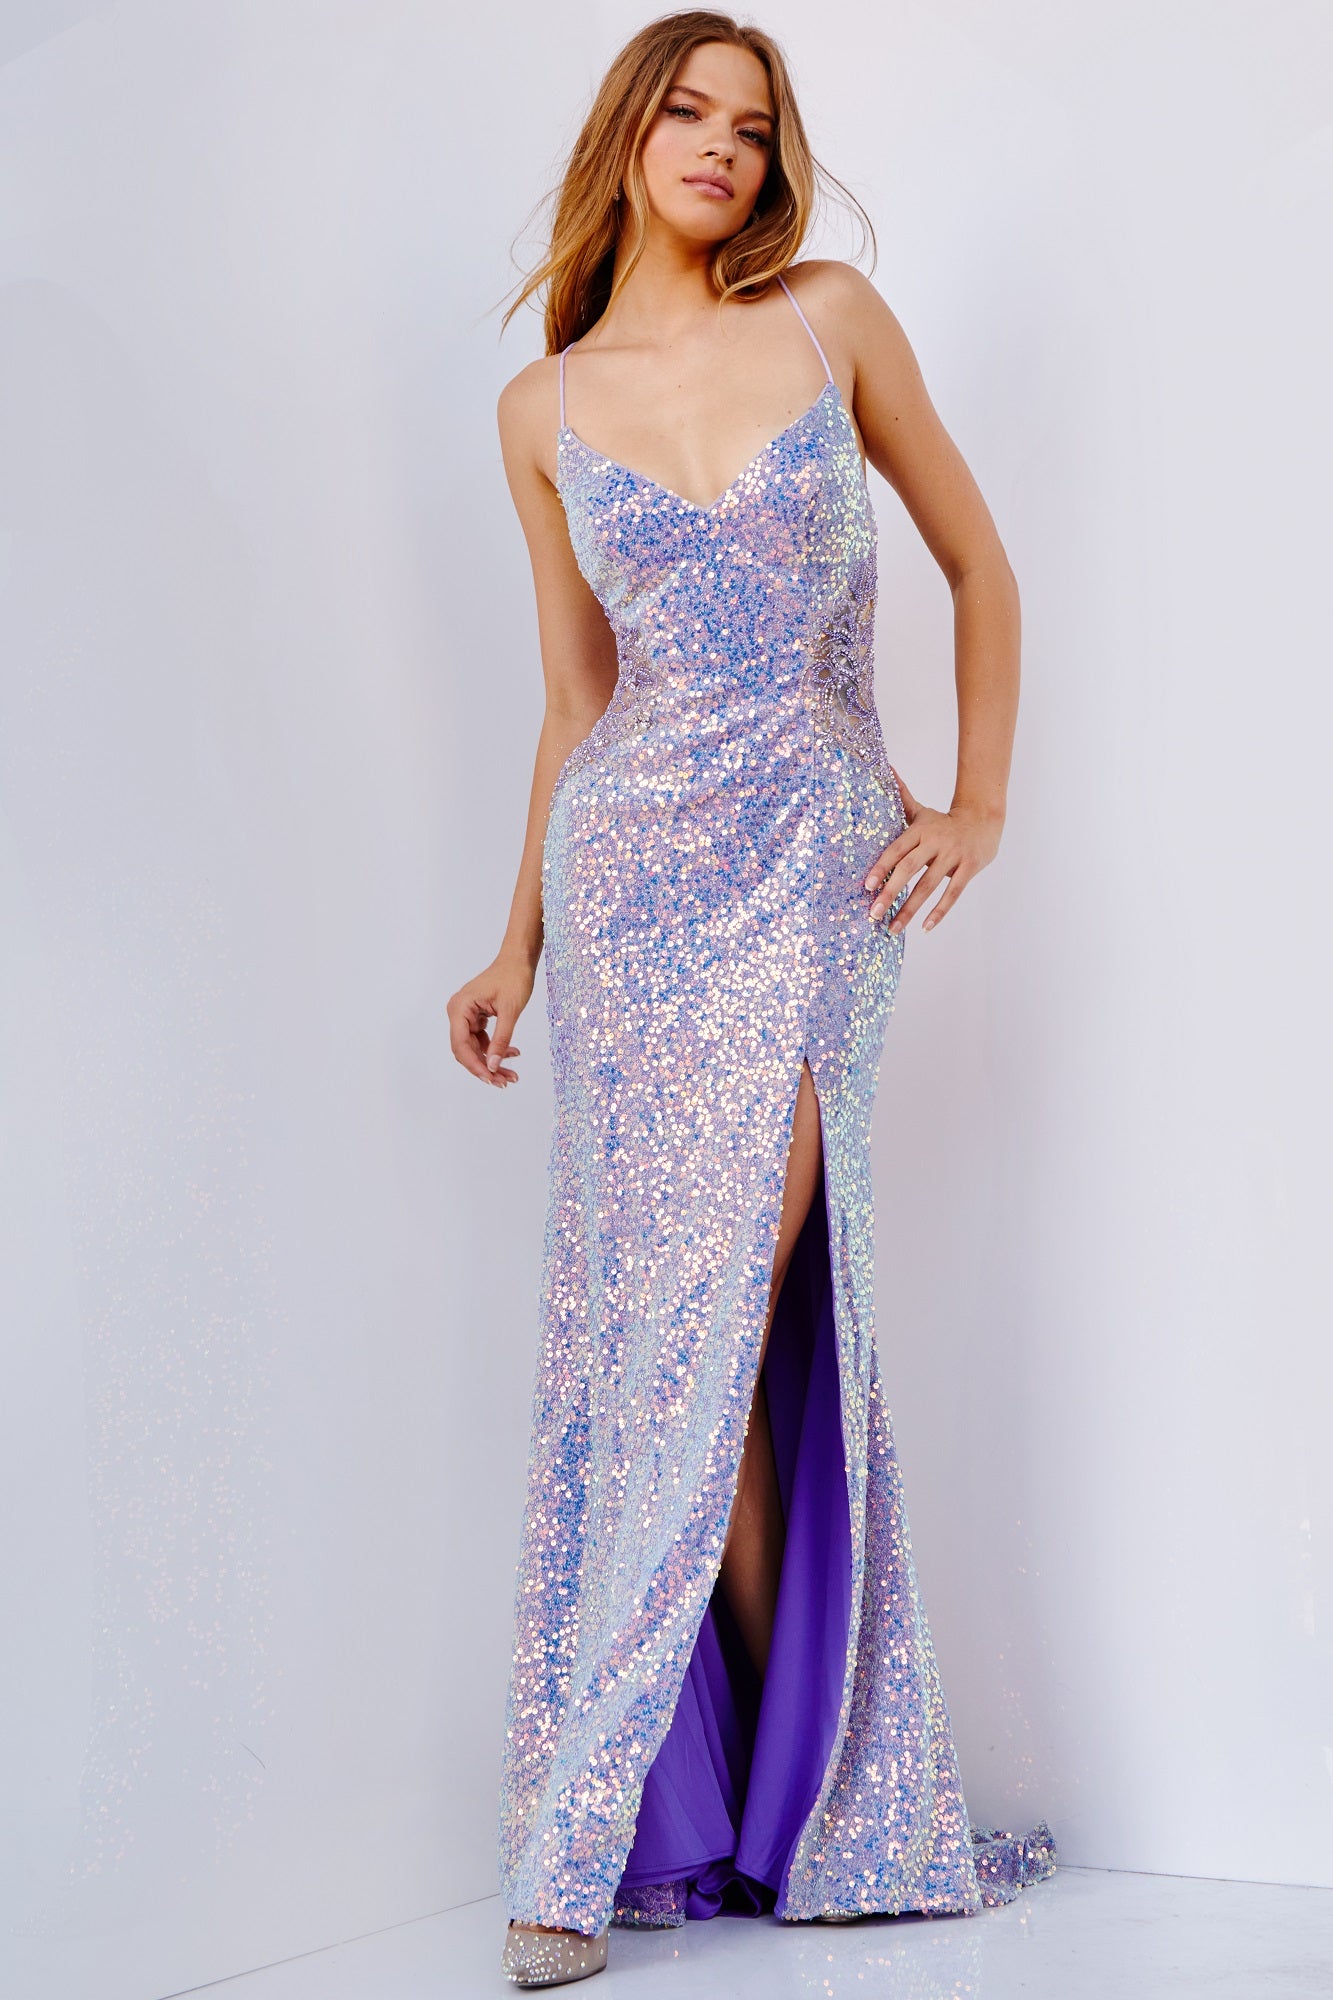 JVN24010 Iridescent sequin prom dress, form fitting silhouette, floor length skirt with high slit and sweeping train, sleeveless bodice with embellished sheer sides, spaghetti straps over shoulders, V neck, open tie back.